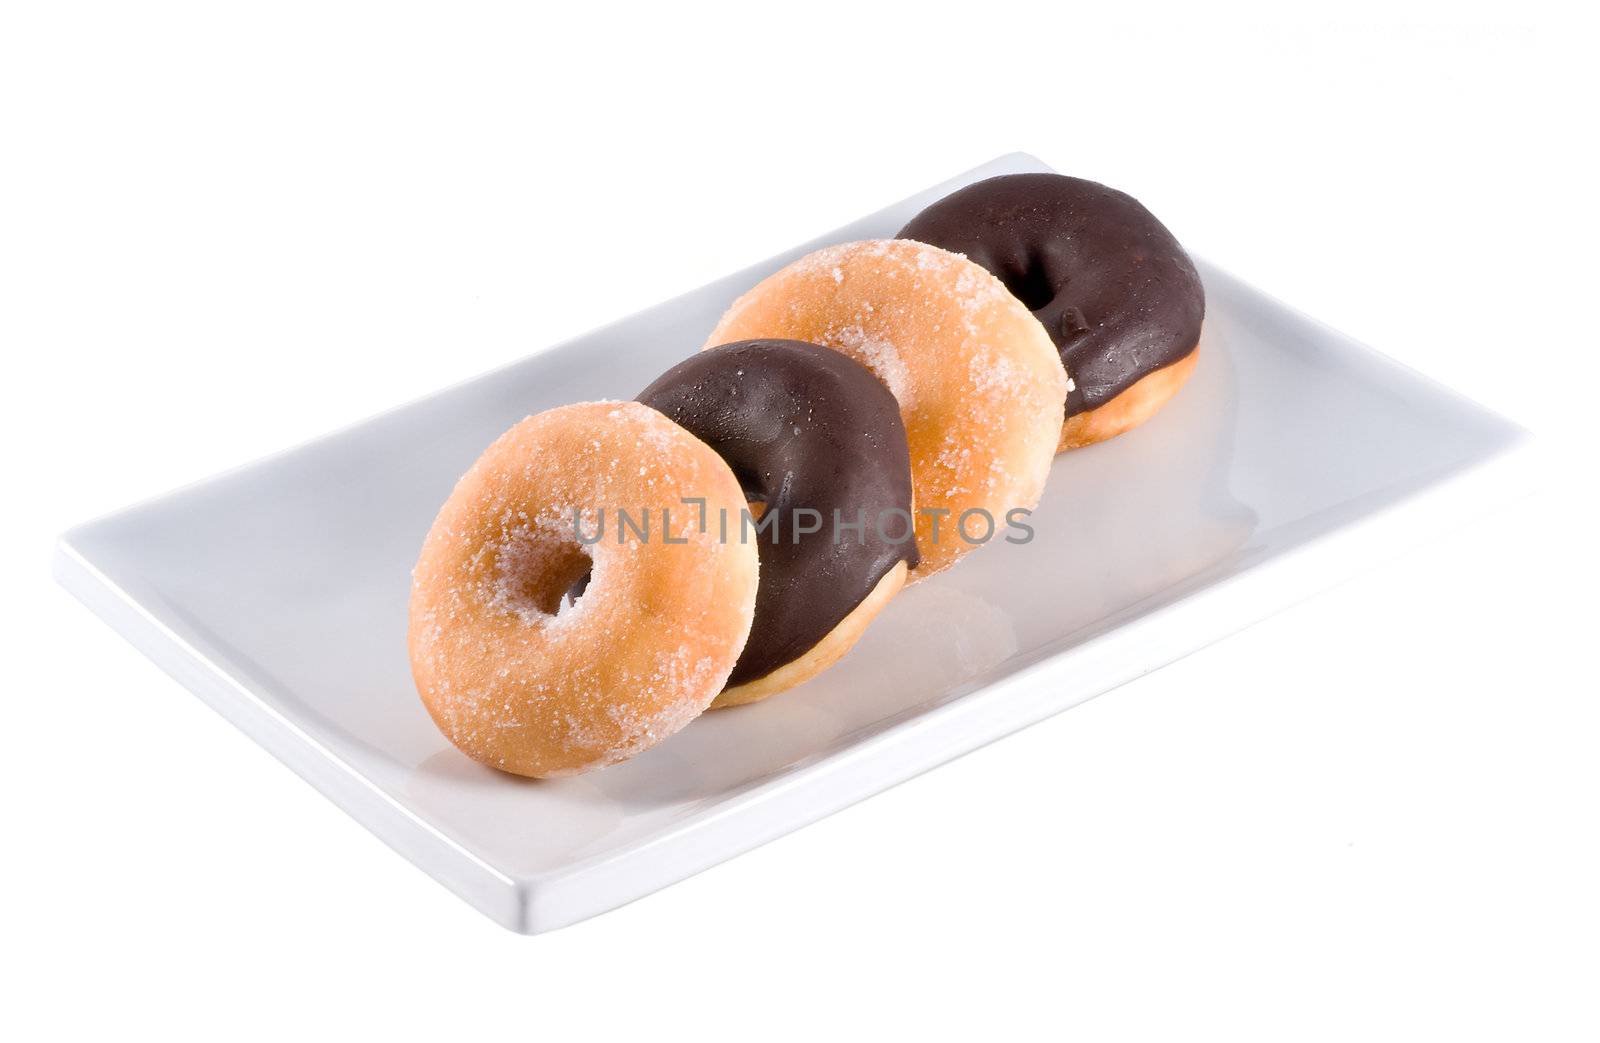 Fresh donuts on a white square plate, isolated on a white background